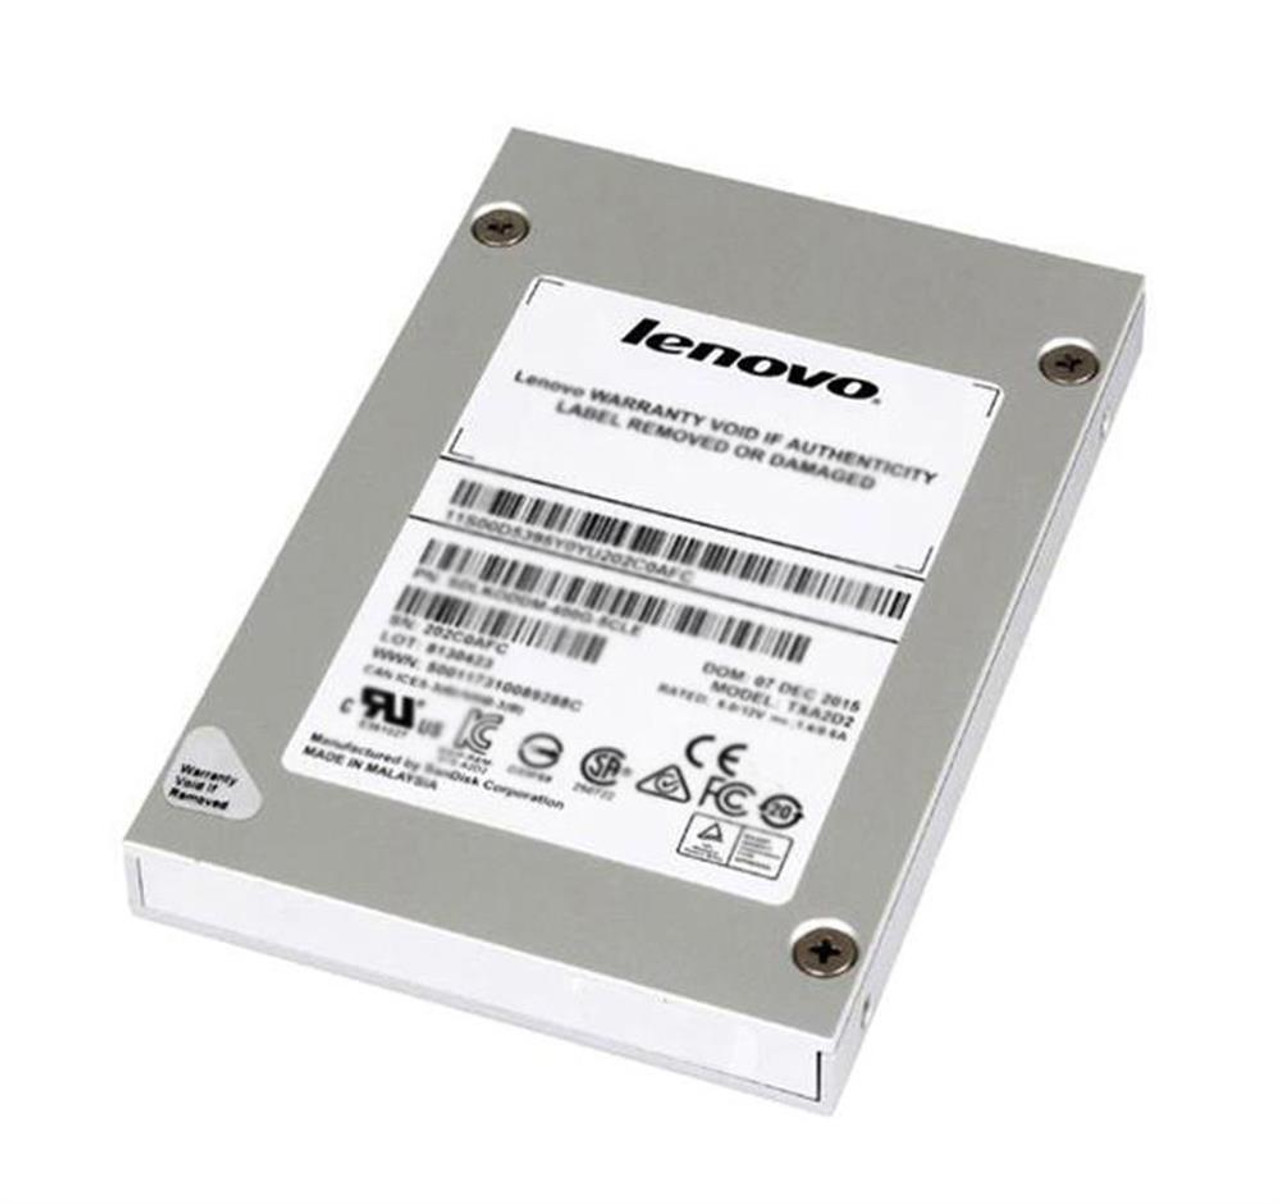 Lenovo 7.68TB TLC SATA 6Gbps 2.5-inch Internal Solid State Drive (SSD) for ThinkServer System